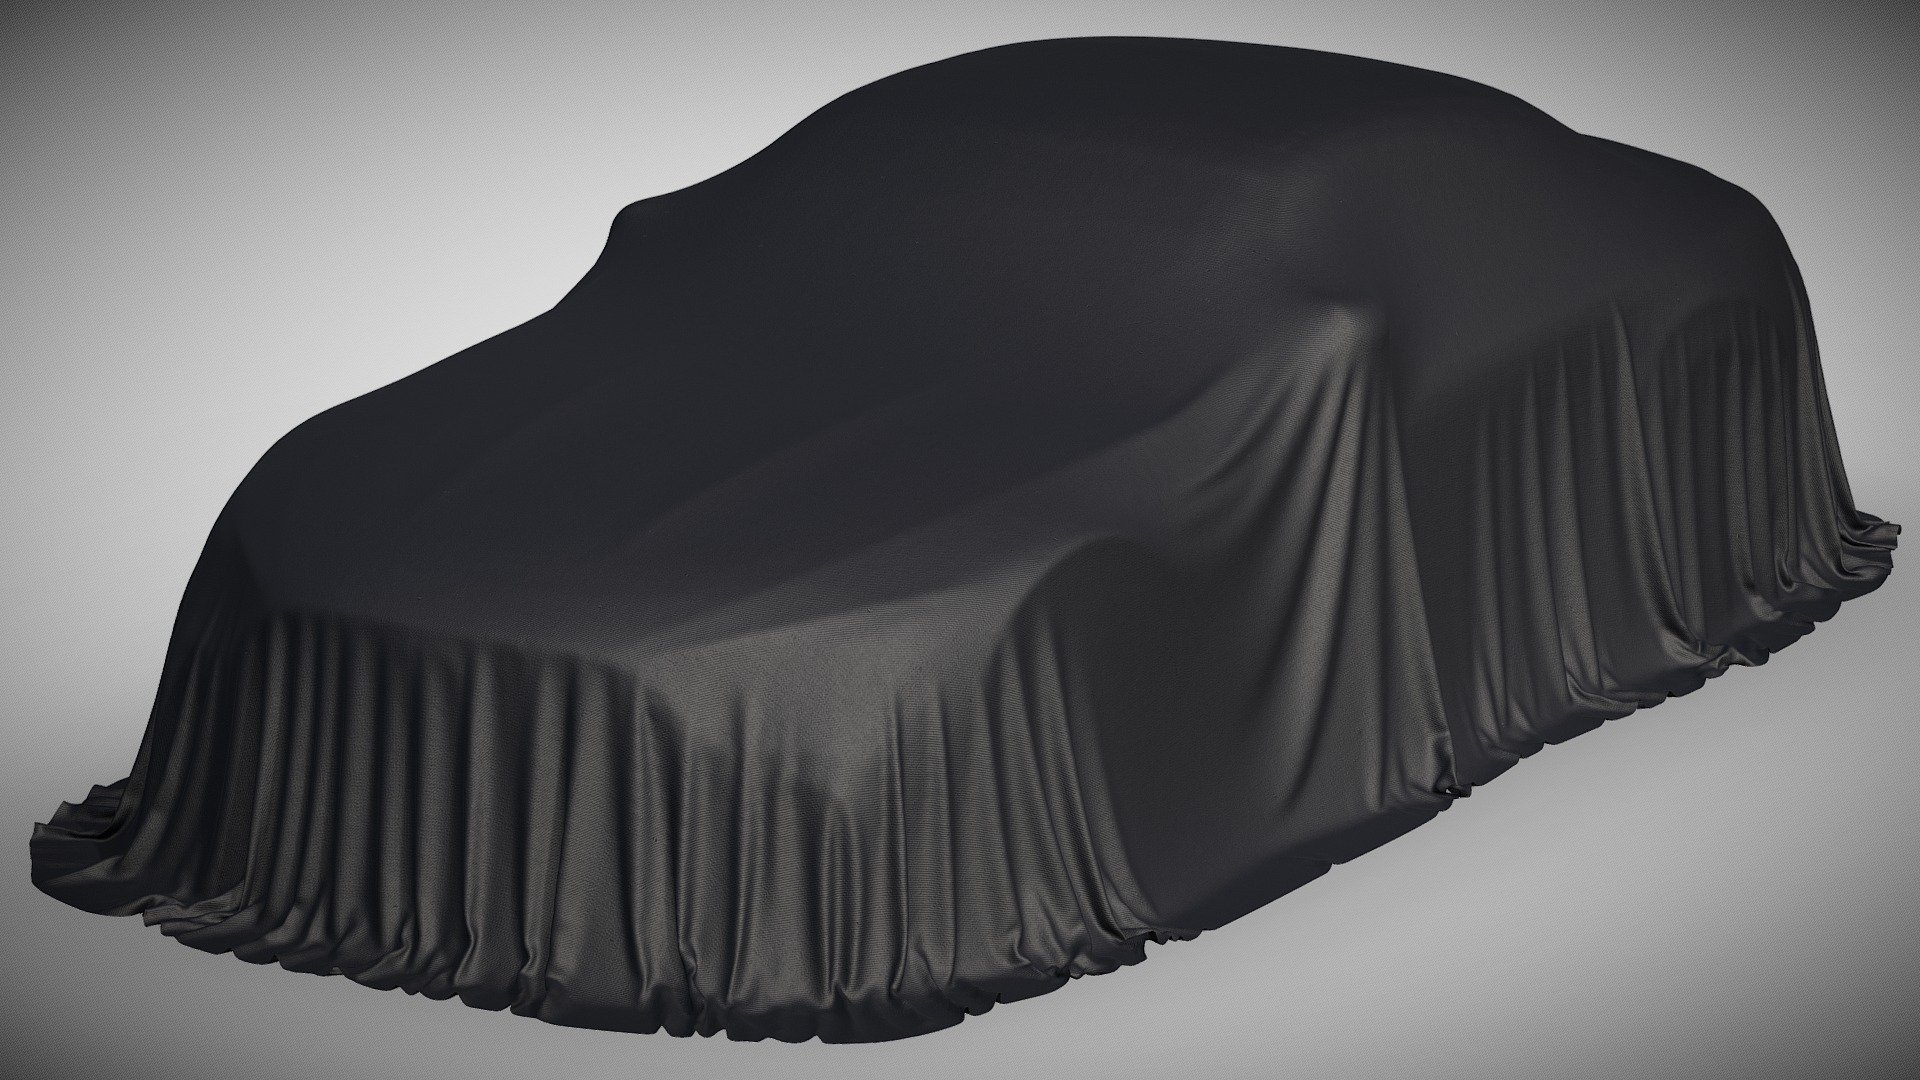 Car Cover coupe

Cover car an auto show traditional hide and reveal ceremony textile cover props. Cover car a manufacturer or dealer motor show traditional fabric cover drapery. For auto show ceremonies, car show ceremonies, manufacturing of the vehicles, unusual future cars, transportation of the future, modern vehicles, modern vehicles engineering, concepts or comfortable vehicles, car machinery, new car presentations, contemporary vehicles, and future auto transportation engineering documentary or educational projects.

Clean geometry Light weight model, yet completely detailed for HI-Res renders. Use for movies, Advertisements or games

Corona render and materials

All textures include in *.rar files

Lighting setup is not included in the file! - Car Cover coupe - Buy Royalty Free 3D model by zifir3d 3d model